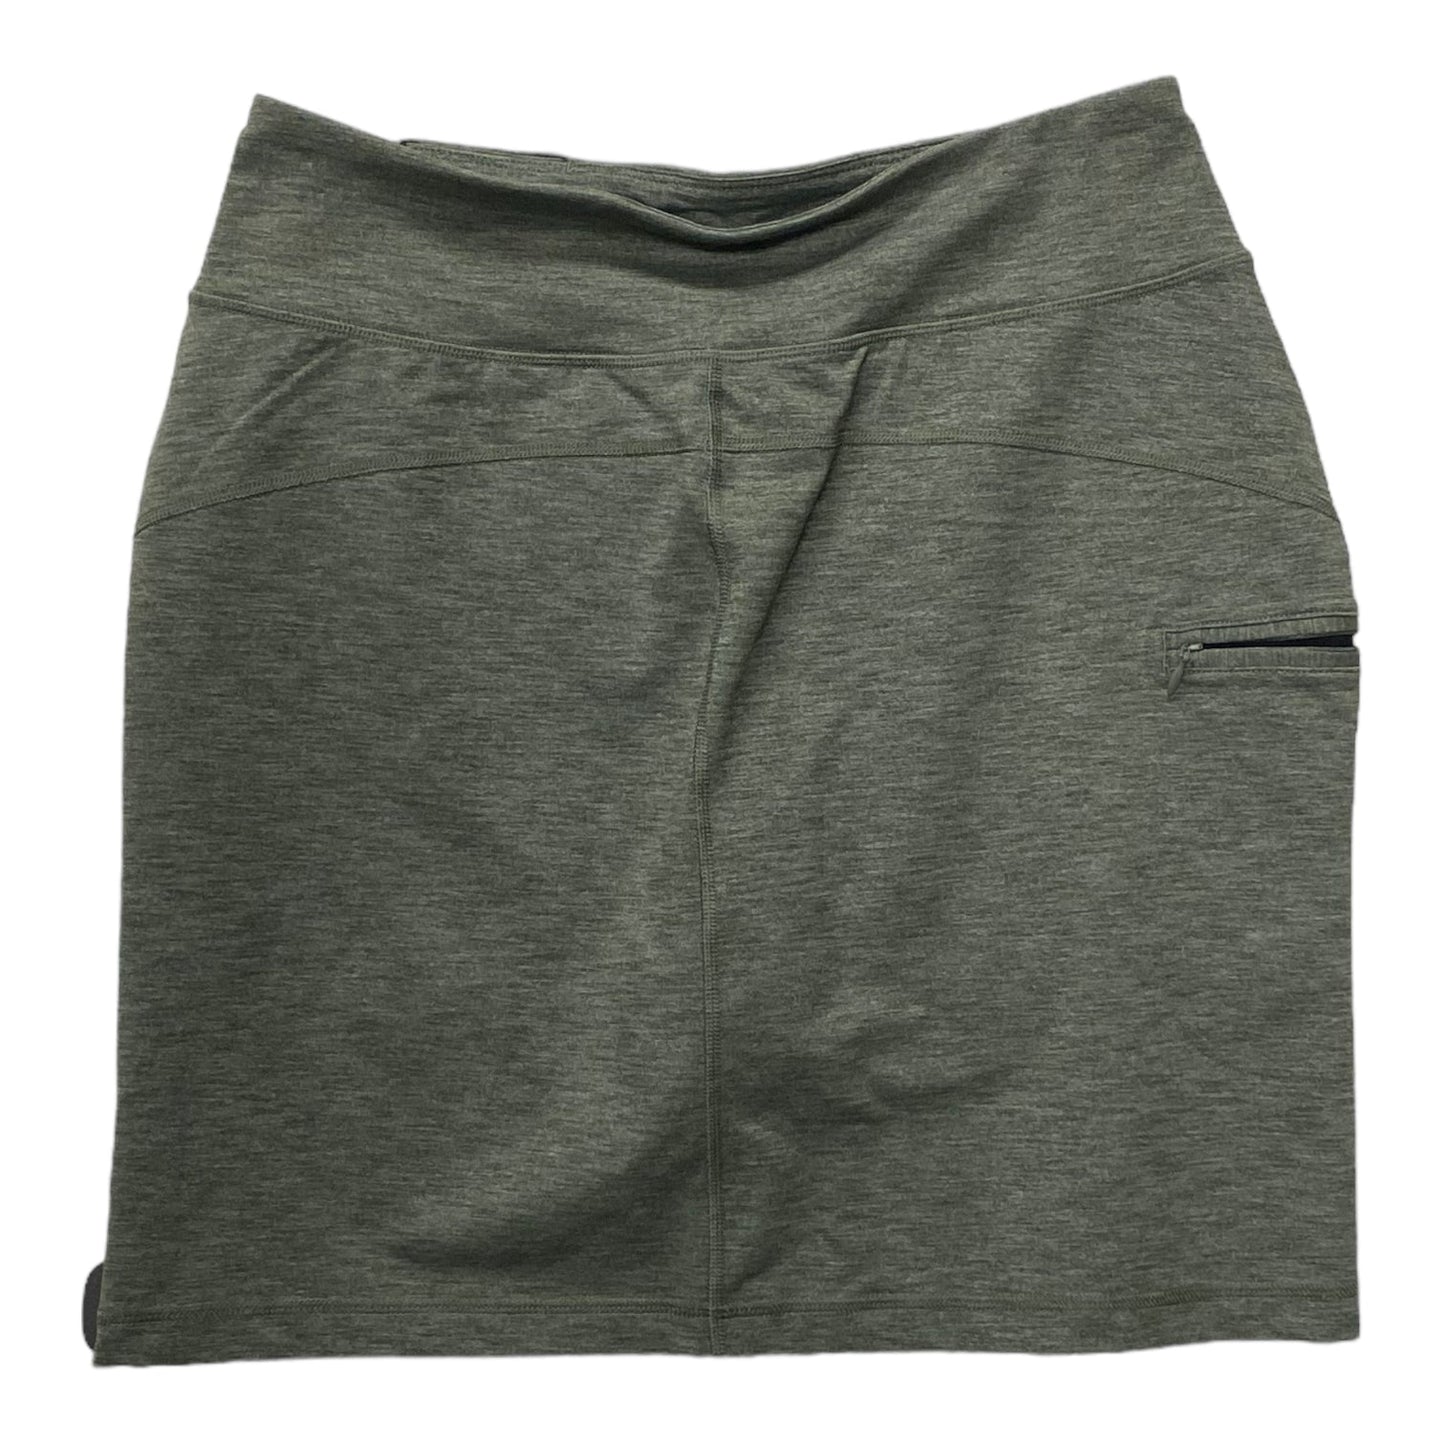 Athletic Skirt By Duluth Trading  Size: S